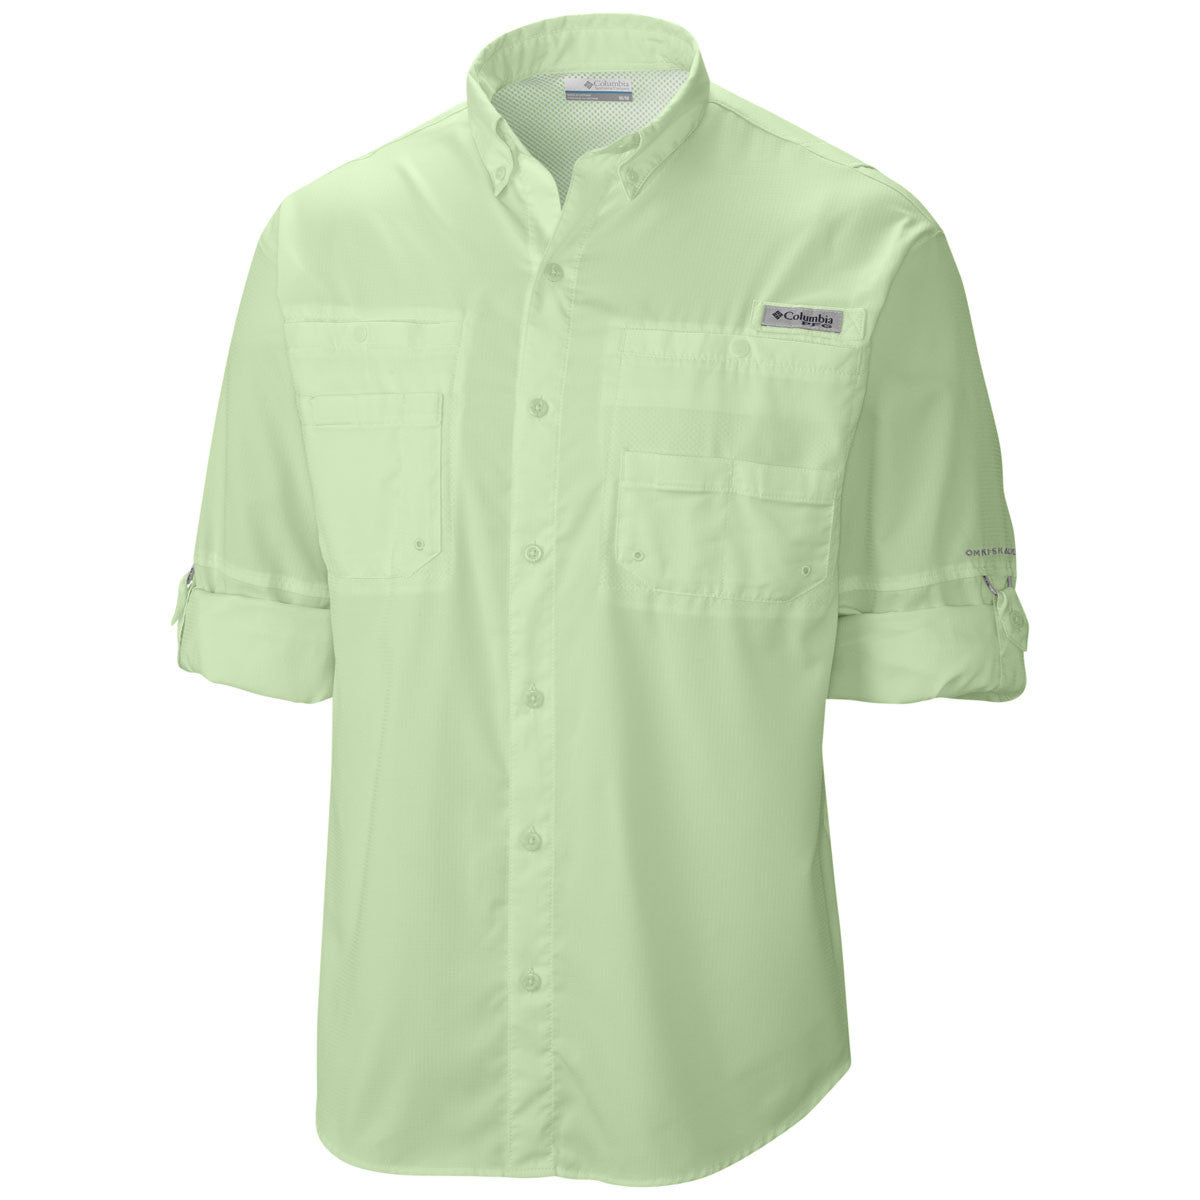 Men's Columbia Tamiami S/S Shirt - Beck's Country Store